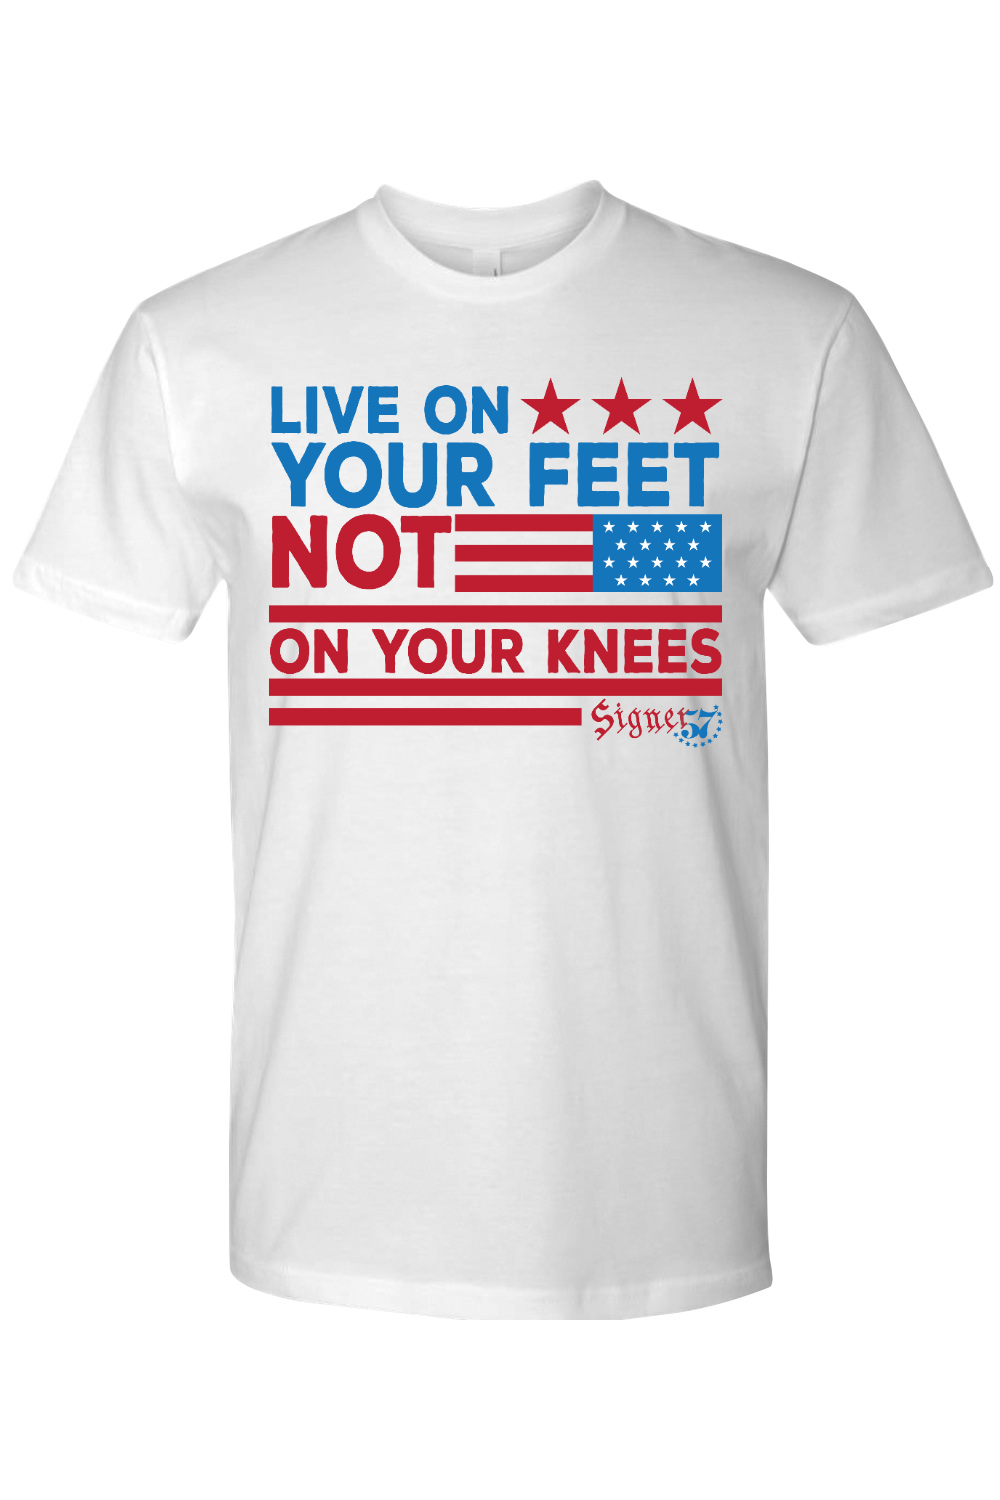 UNISEX T-Shirt - Live On Your Feet Not On Your Knees